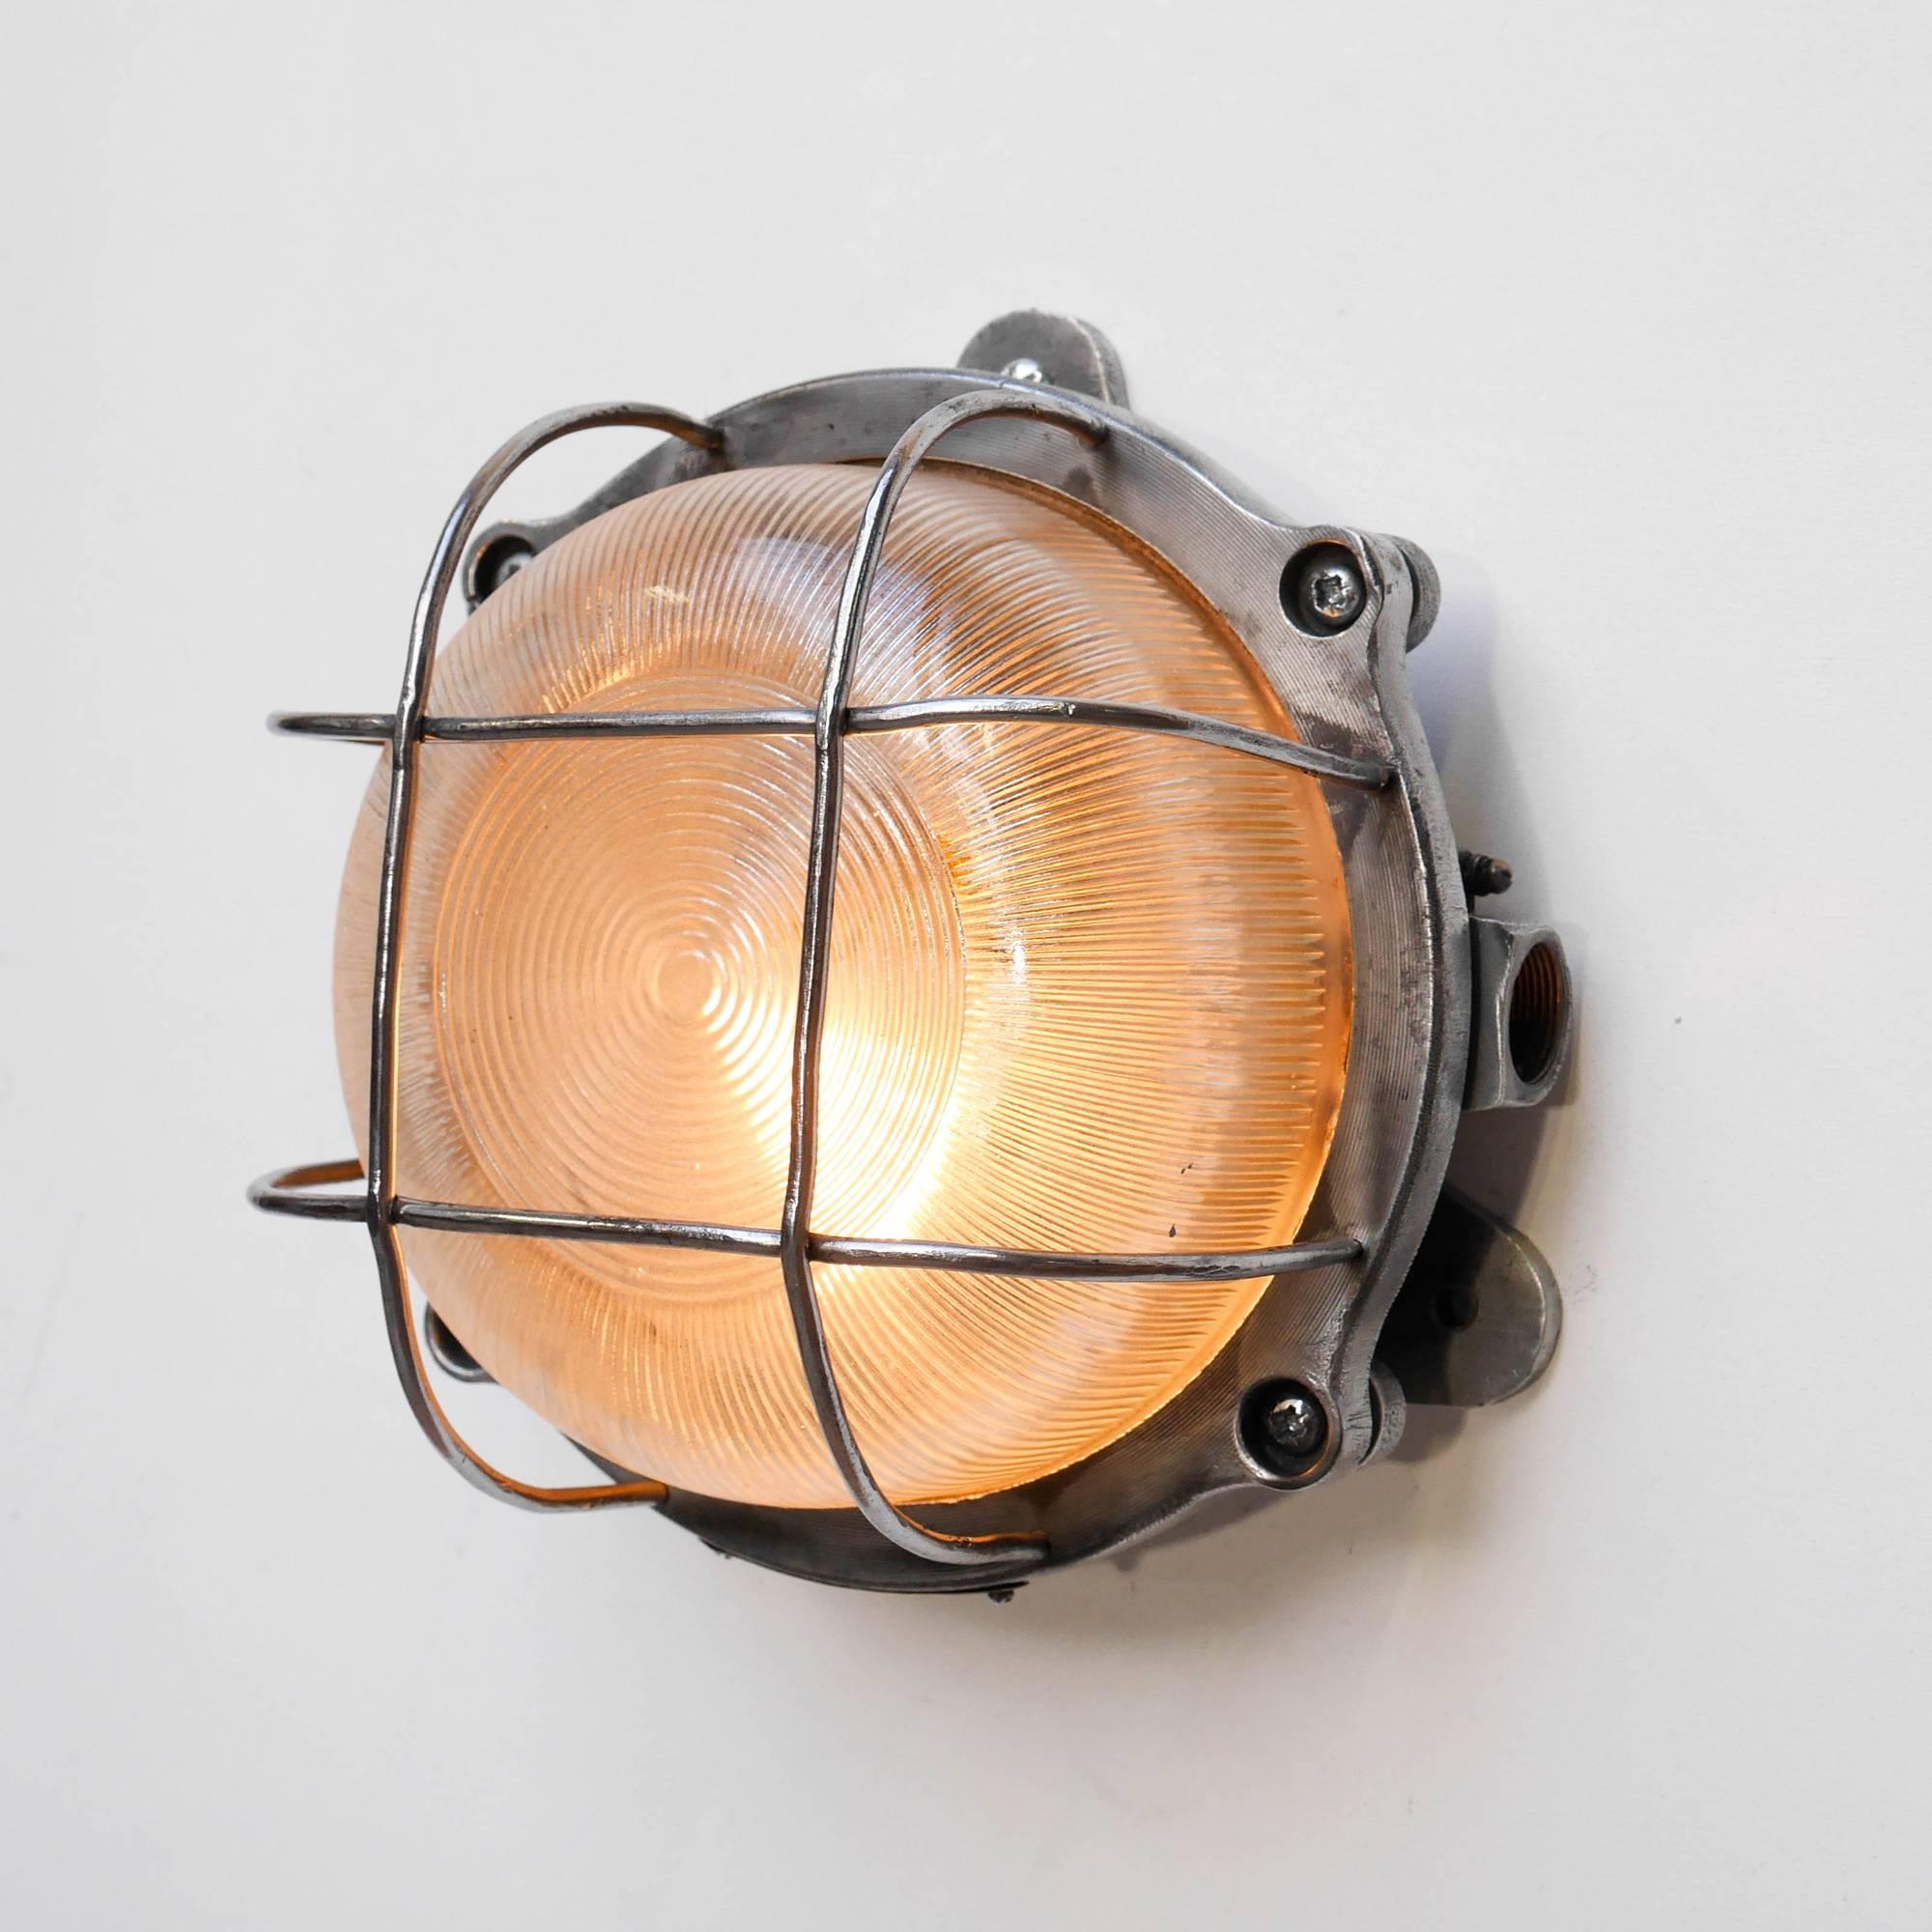 Polished French Round Fenced Wall Light, circa 1950